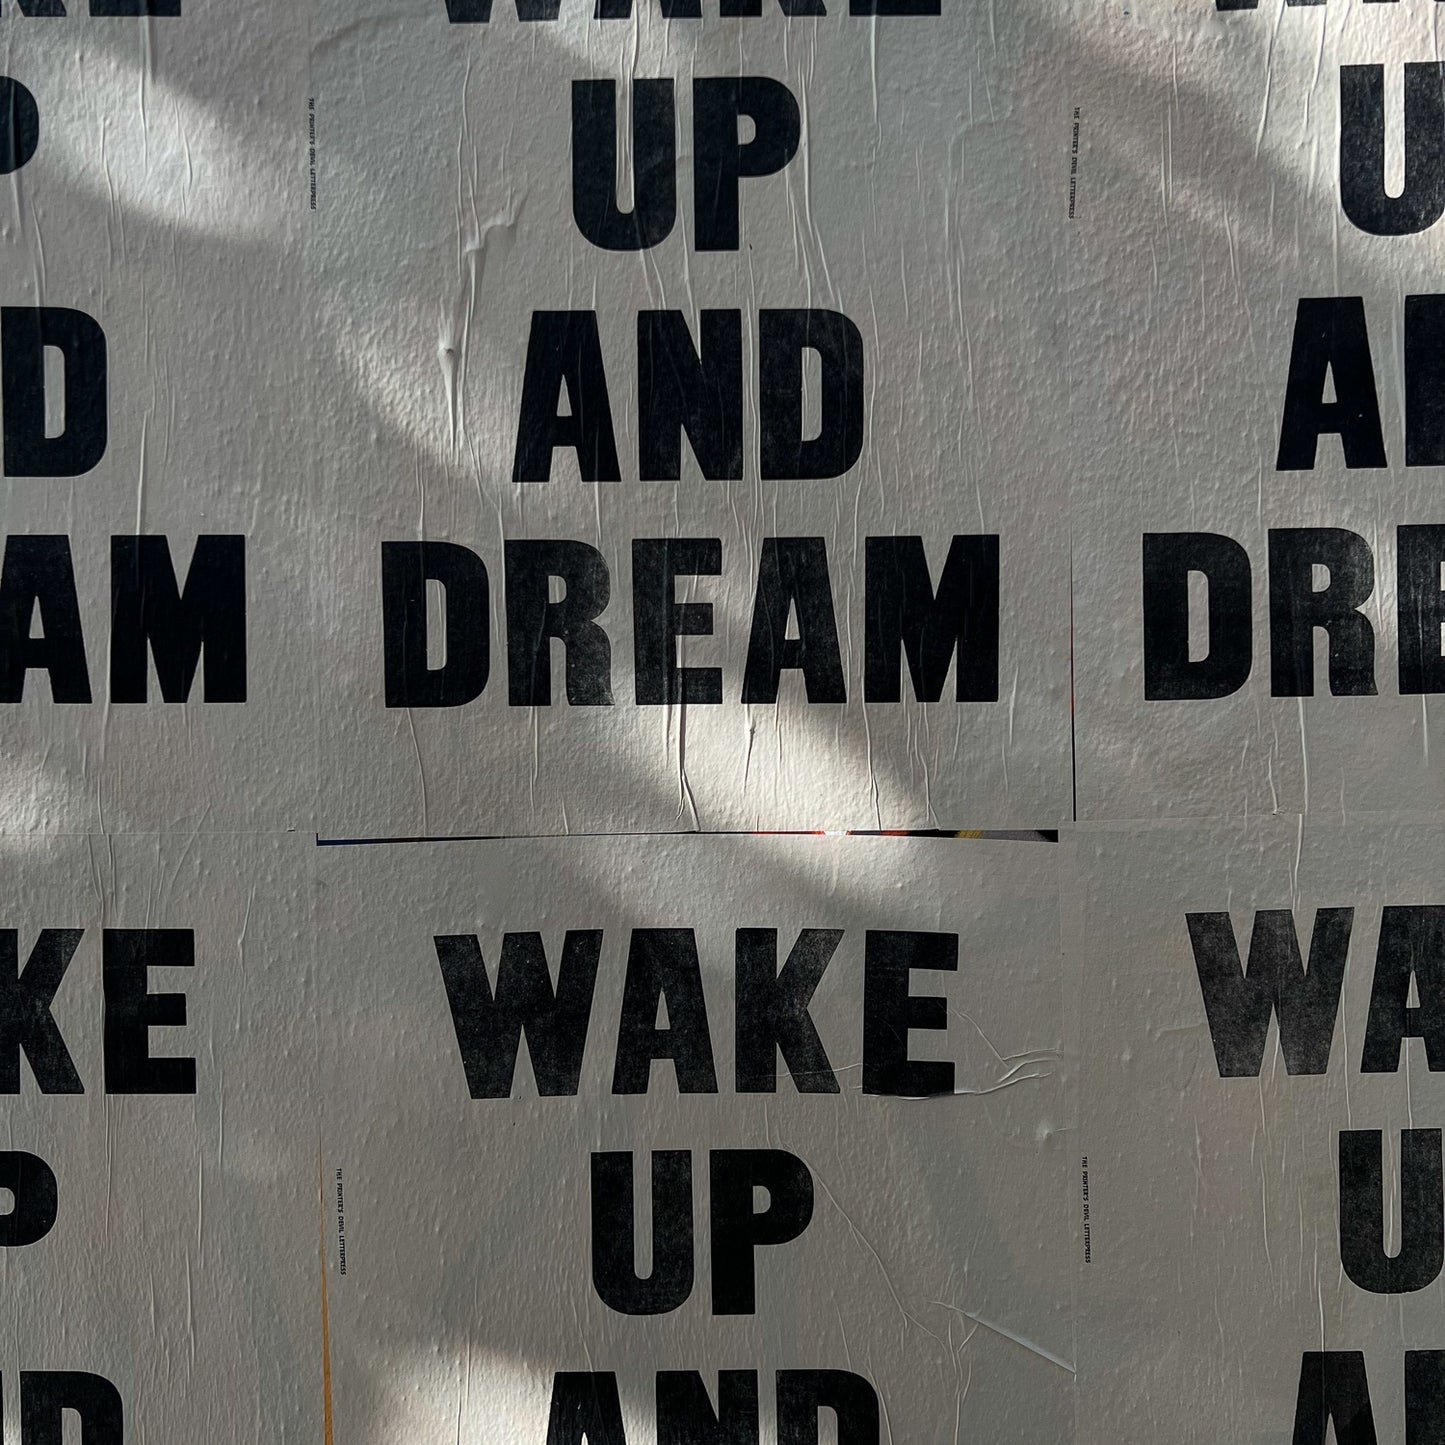 WAKE UP AND DREAM/ Poster